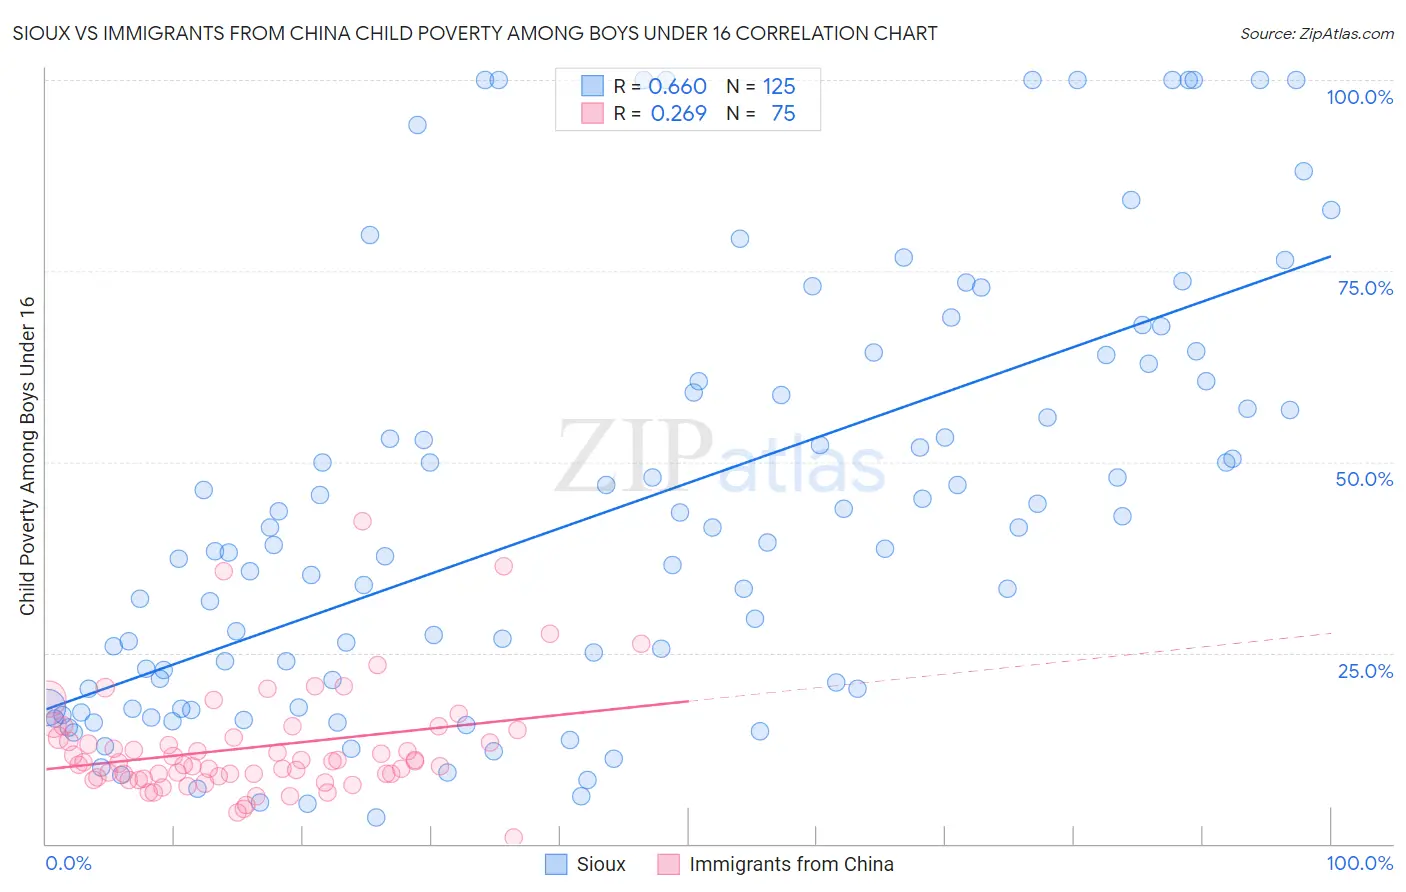 Sioux vs Immigrants from China Child Poverty Among Boys Under 16